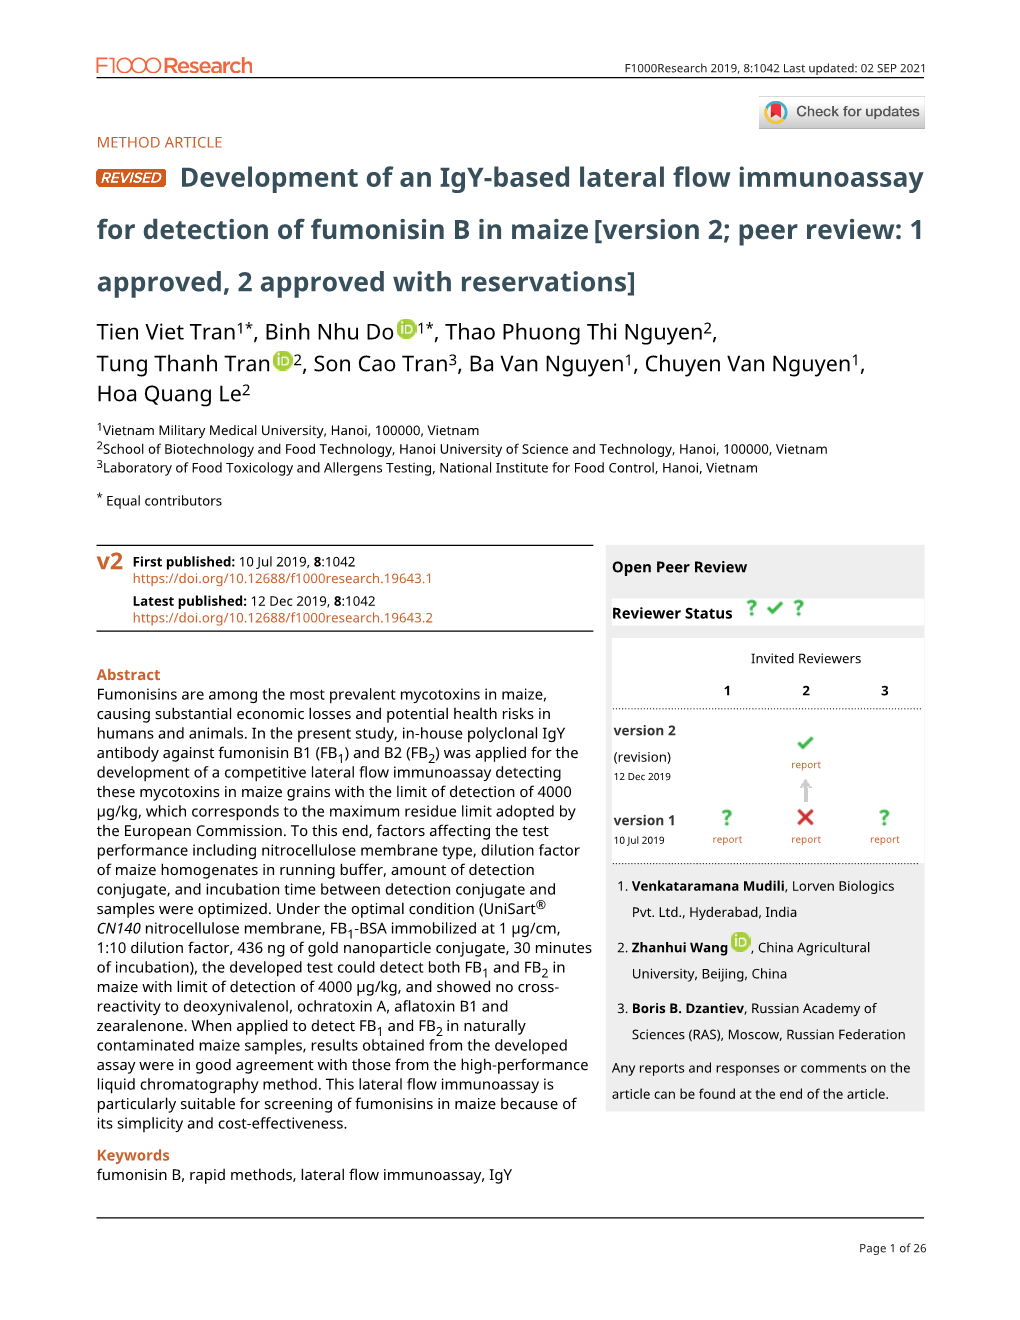 Development of an Igy-Based Lateral Flow Immunoassay for Detection of Fumonisin B in Maize [Version 2; Peer Review: 1 Approved, 2 Approved with Reservations]